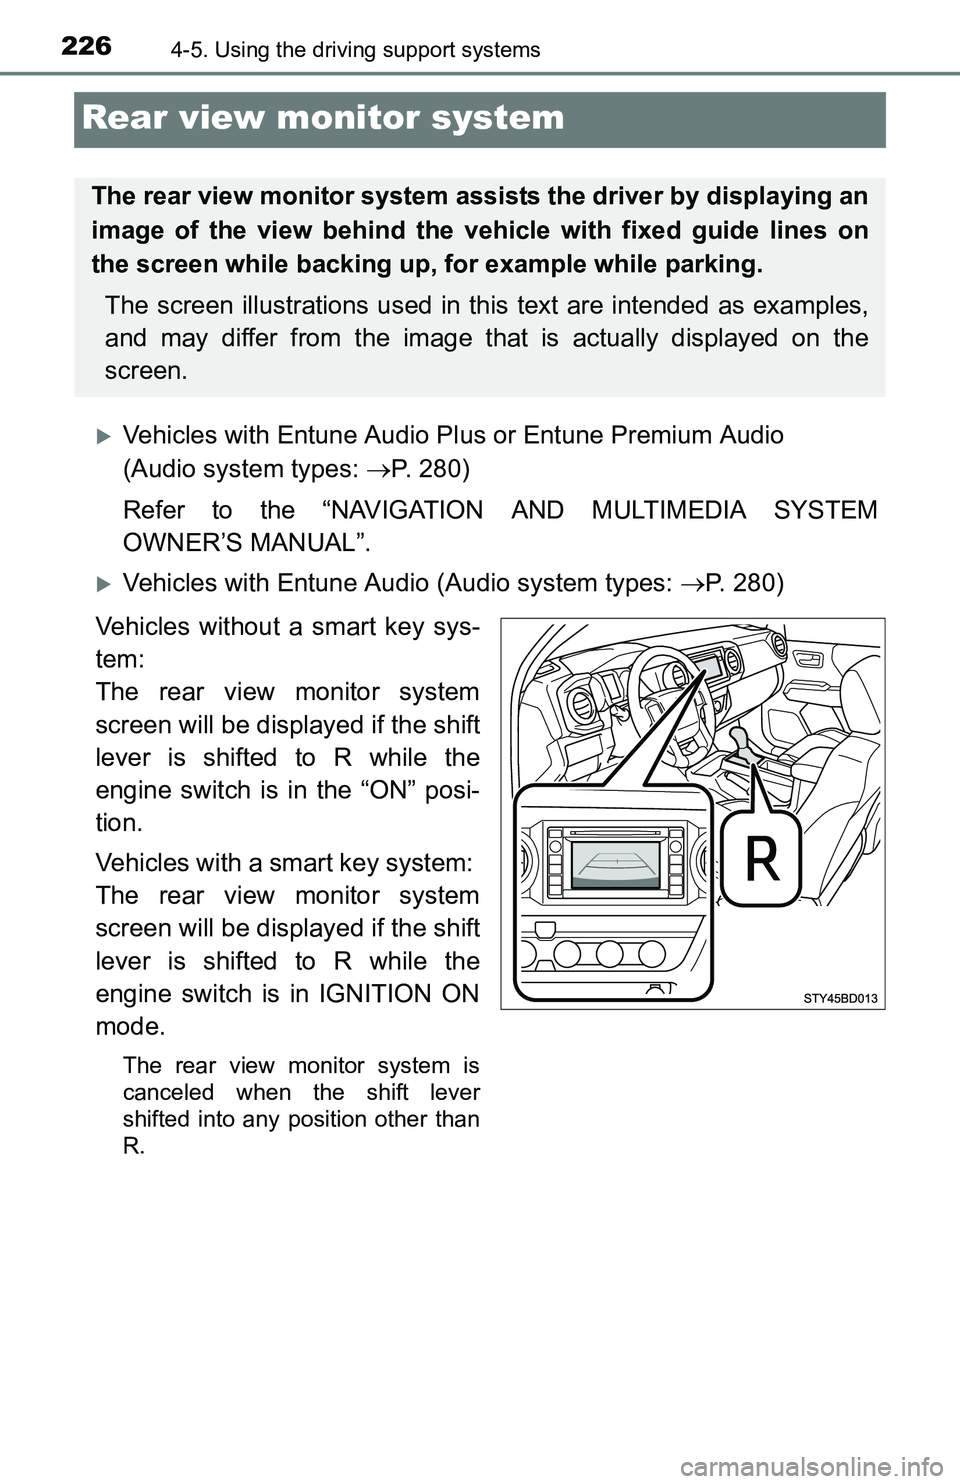 TOYOTA TACOMA 2016  Owners Manual (in English) 2264-5. Using the driving support systems
Rear view monitor system
Vehicles with Entune Audio Plus or Entune Premium Audio 
(Audio system types: P. 280)
Refer to the “NAVIGATION AND MULTIMEDIA